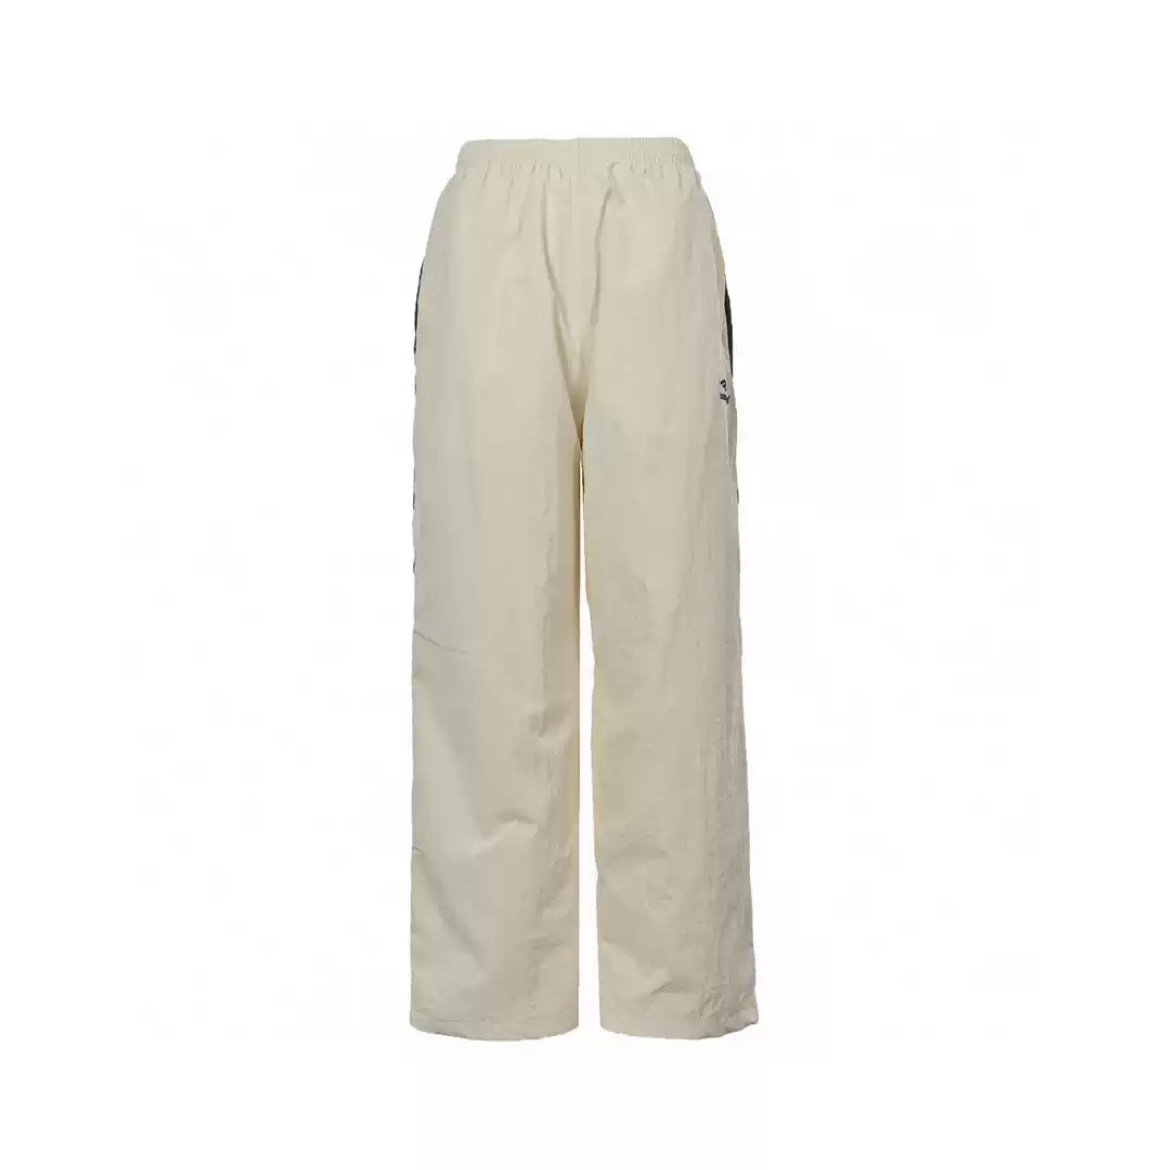 Balenciaga Clothing Pants & Trousers Embroidery Cotton Casual